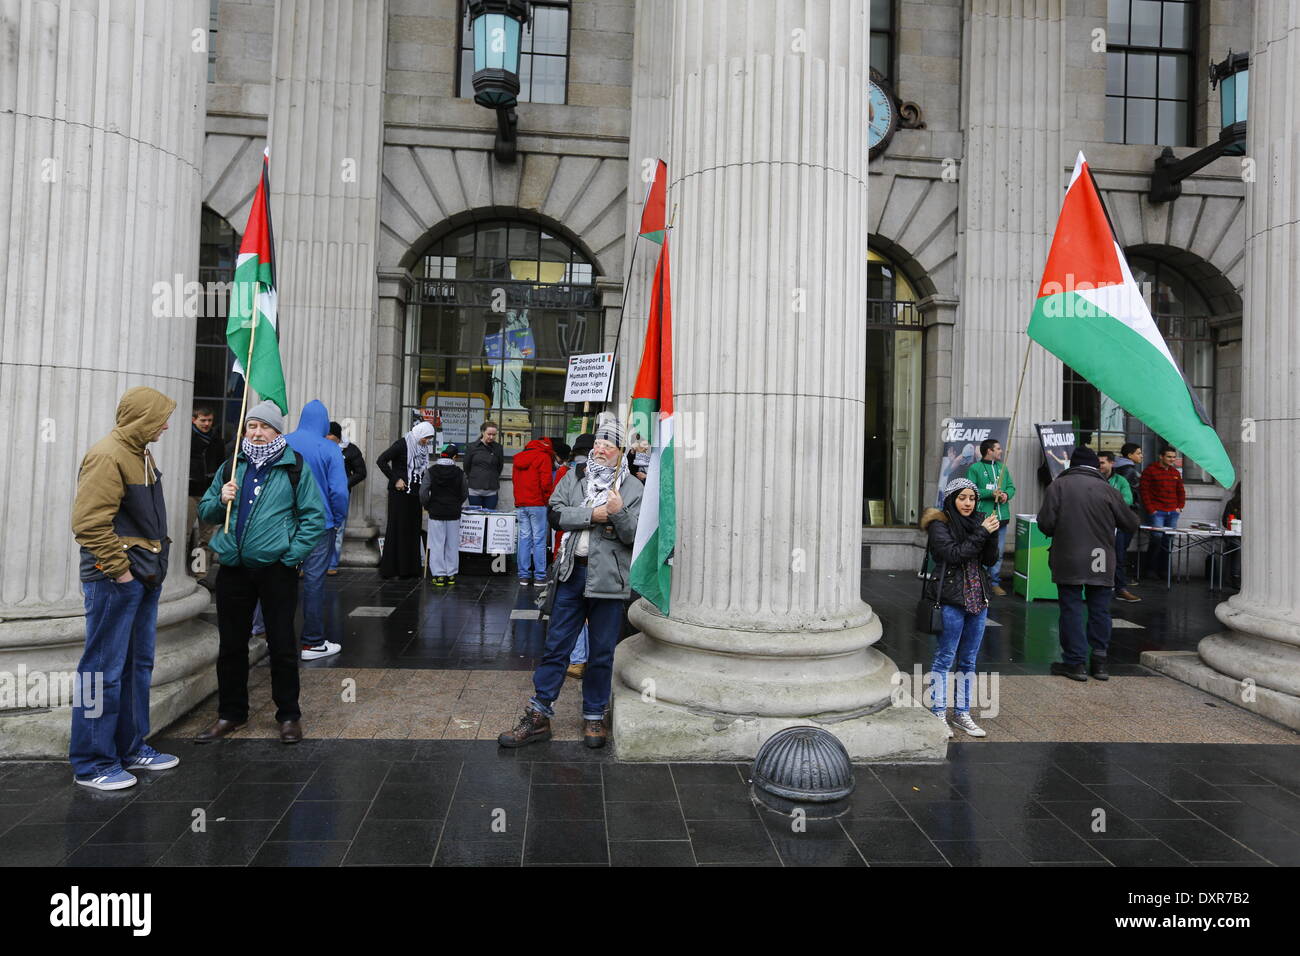 Dublin, Ireland. 29th March 2014. Activists from the Ireland Palestine Solidarity Campaign stand outside the GPO (General Post Office), holding Palestinian flags and posters. The Ireland Palestine Solidarity Campaign (IPSC) protested in Dublin's O'Connell Street on the 38th anniversary of the 1976 land day protest against discrimination of Palestinians by Israel and the expansion of Israeli settlements in Palestinian territory. Credit:  Michael Debets/Alamy Live News Stock Photo